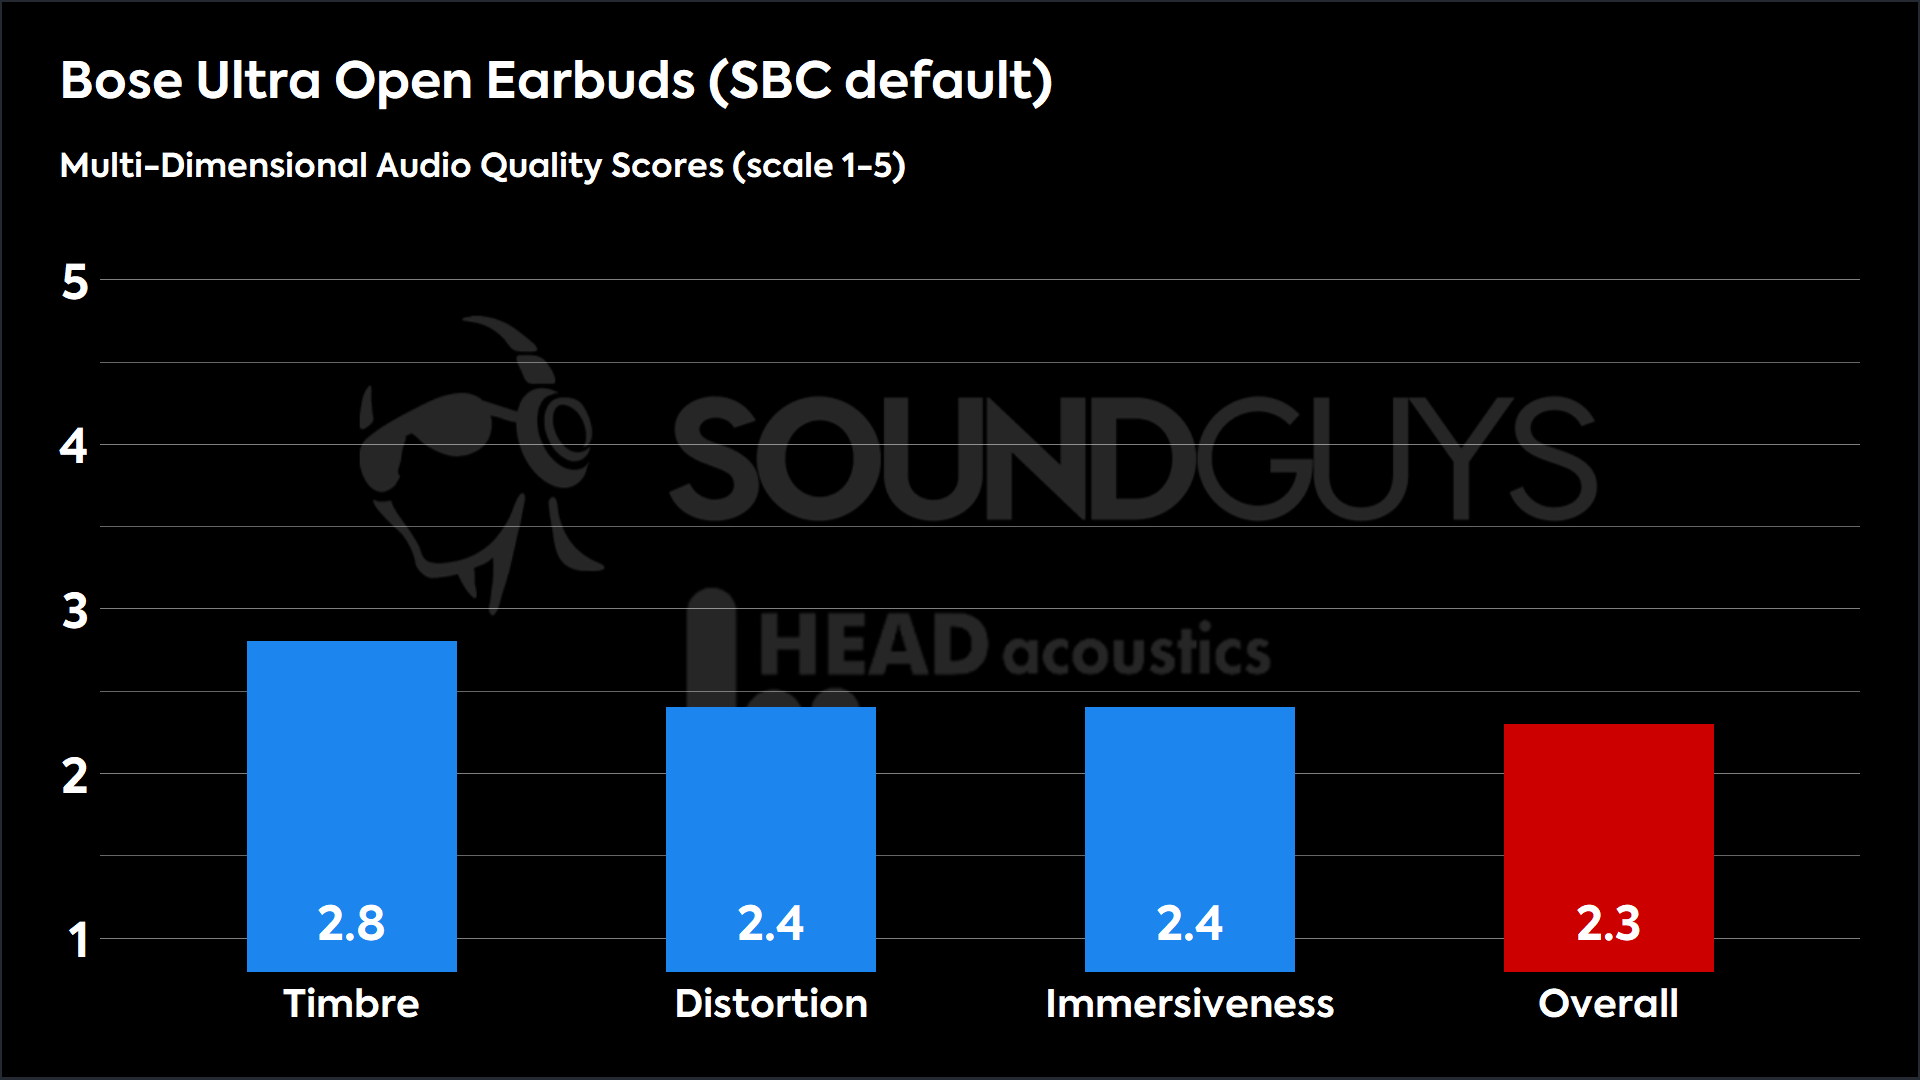 This chart shows the MDAQS results for the Bose Ultra Open Earbuds in SBC default mode. The Timbre score is 2.8, The Distortion score is 2.4, the Immersiveness score is 2.4, and the Overall Score is 2.3).